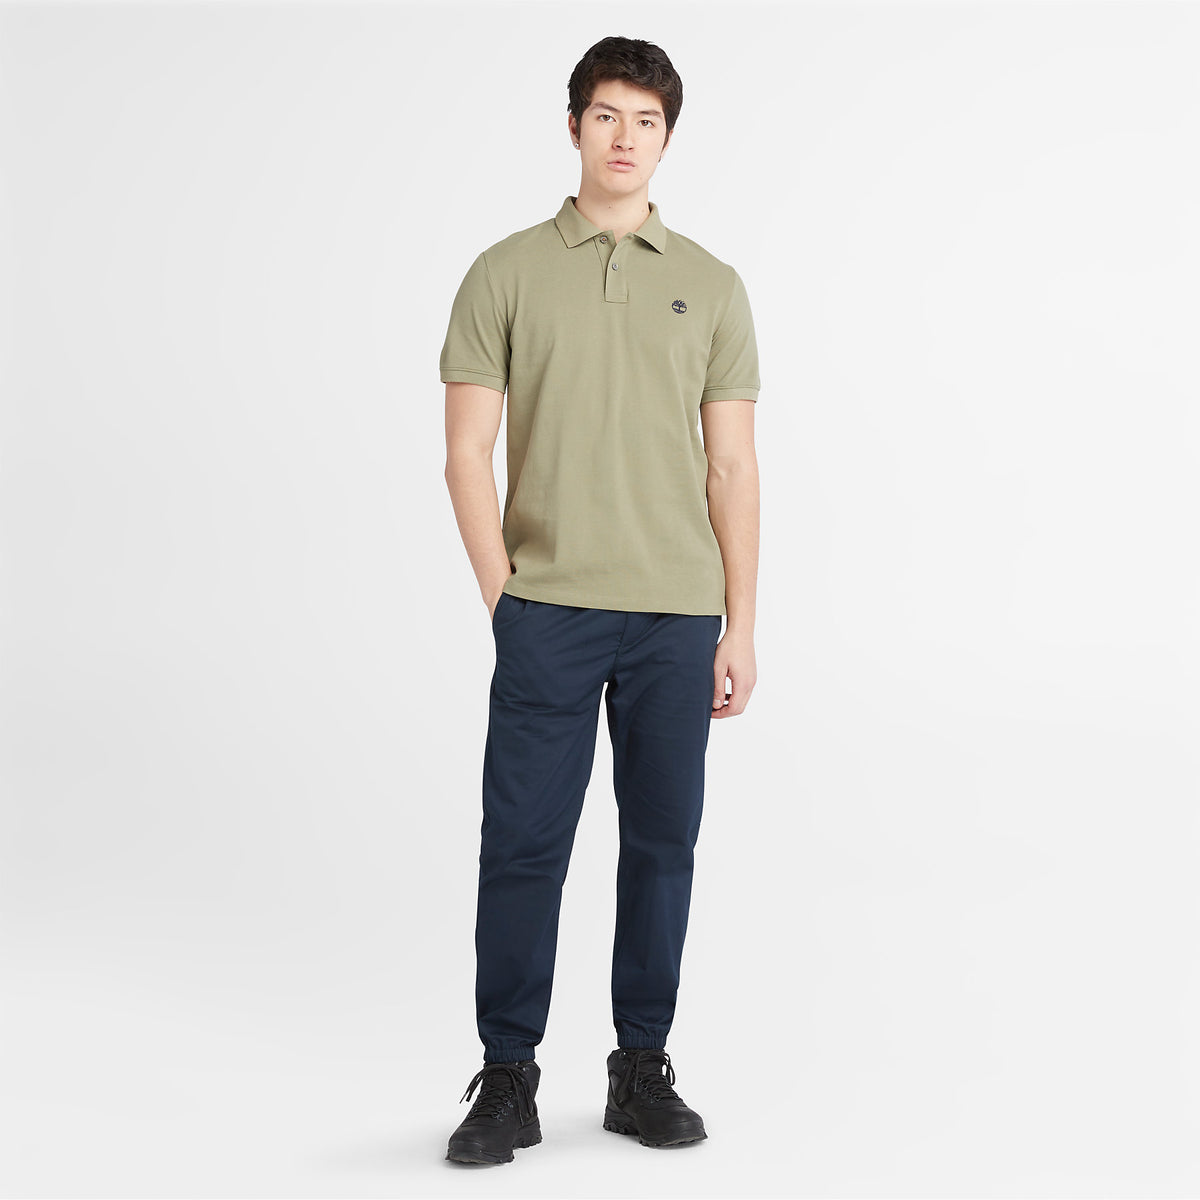 Timberland Mens Millers River Pique Polo T-Shirt - Short Sleeved, 02, Tb0A26N4, #colour_Cassel Earth